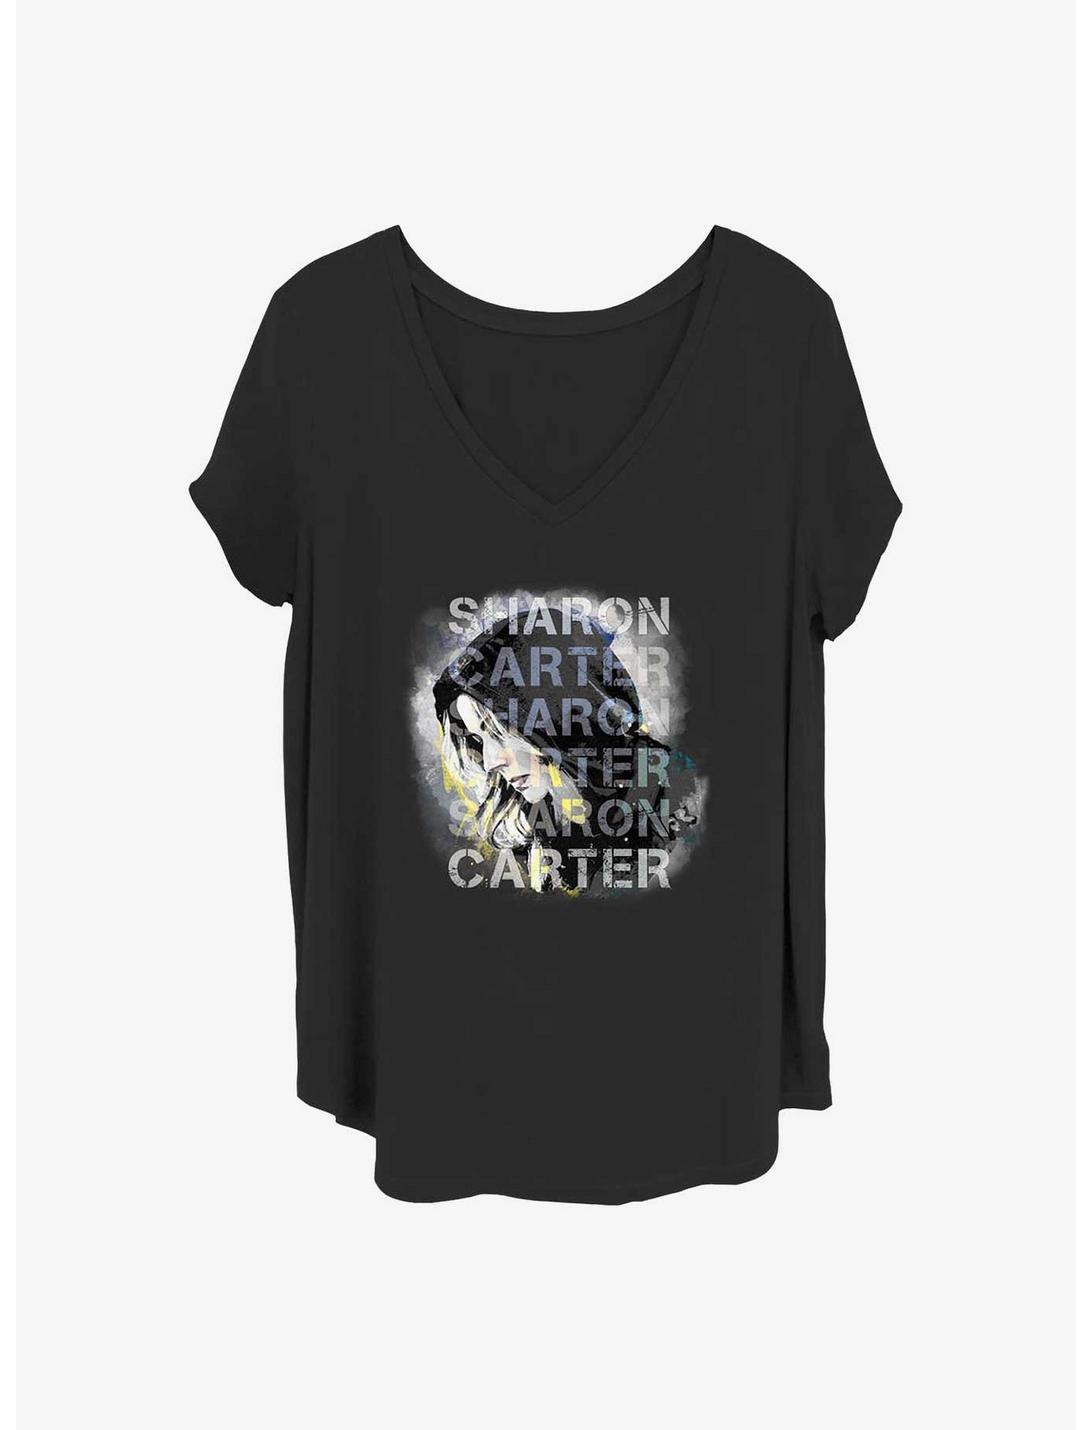 Marvel The Falcon and the Winter Soldier Carter Overlay Girls T-Shirt Plus Size, BLACK, hi-res